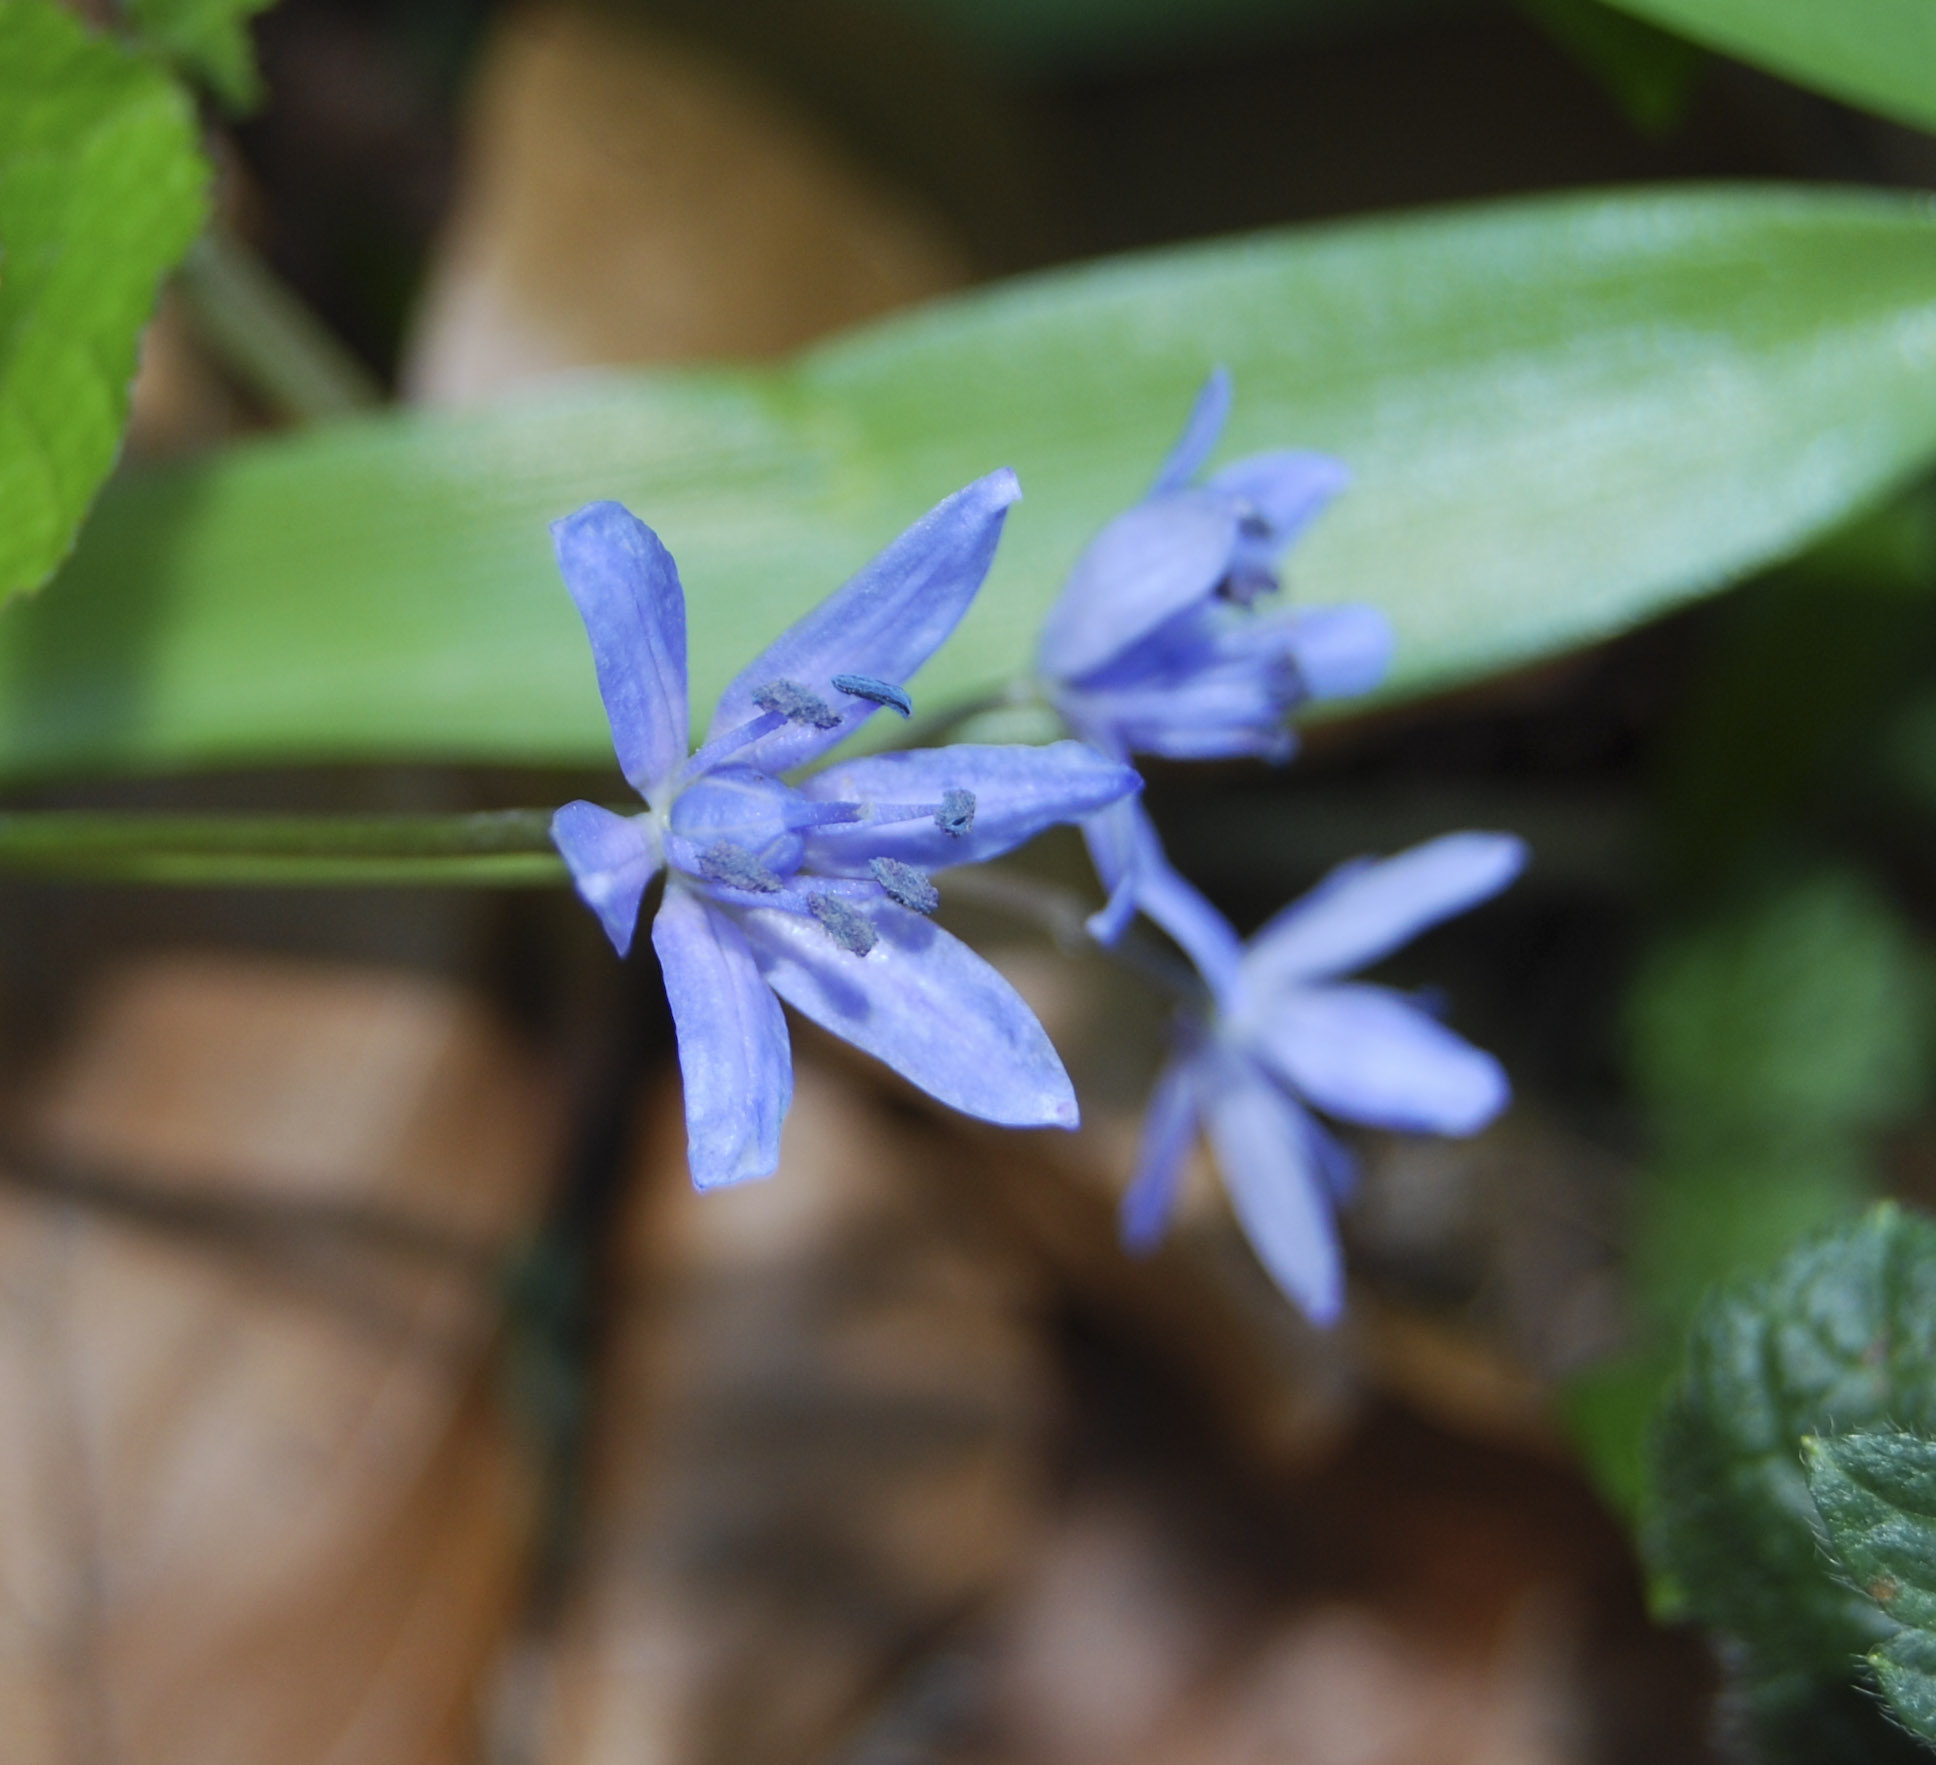 a flower with blue petals is shown near leaves